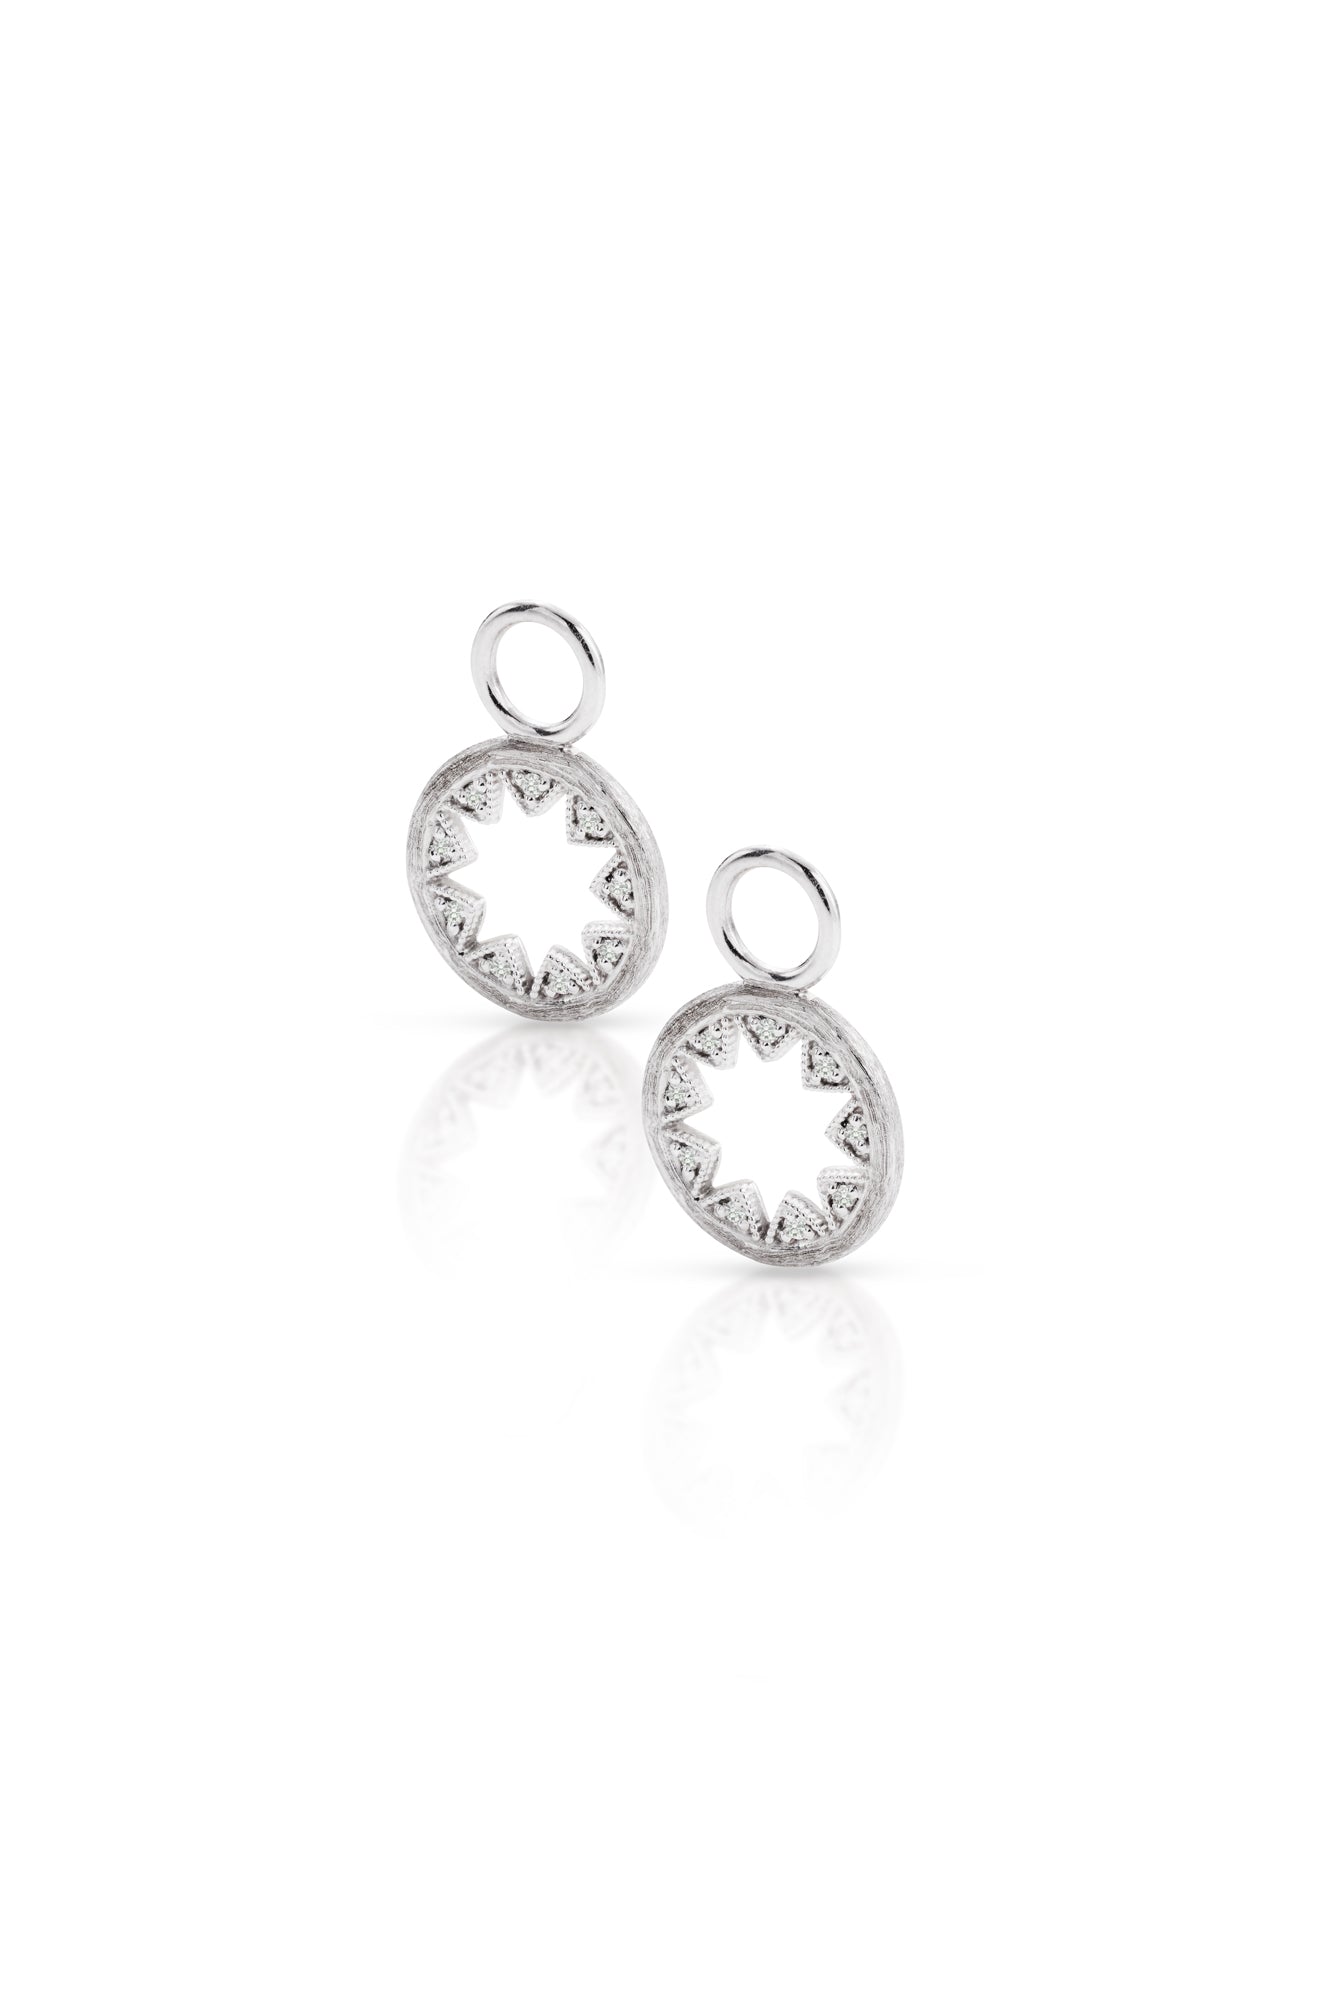 Tiny Lisse Half Kite Open Round Earring Charms